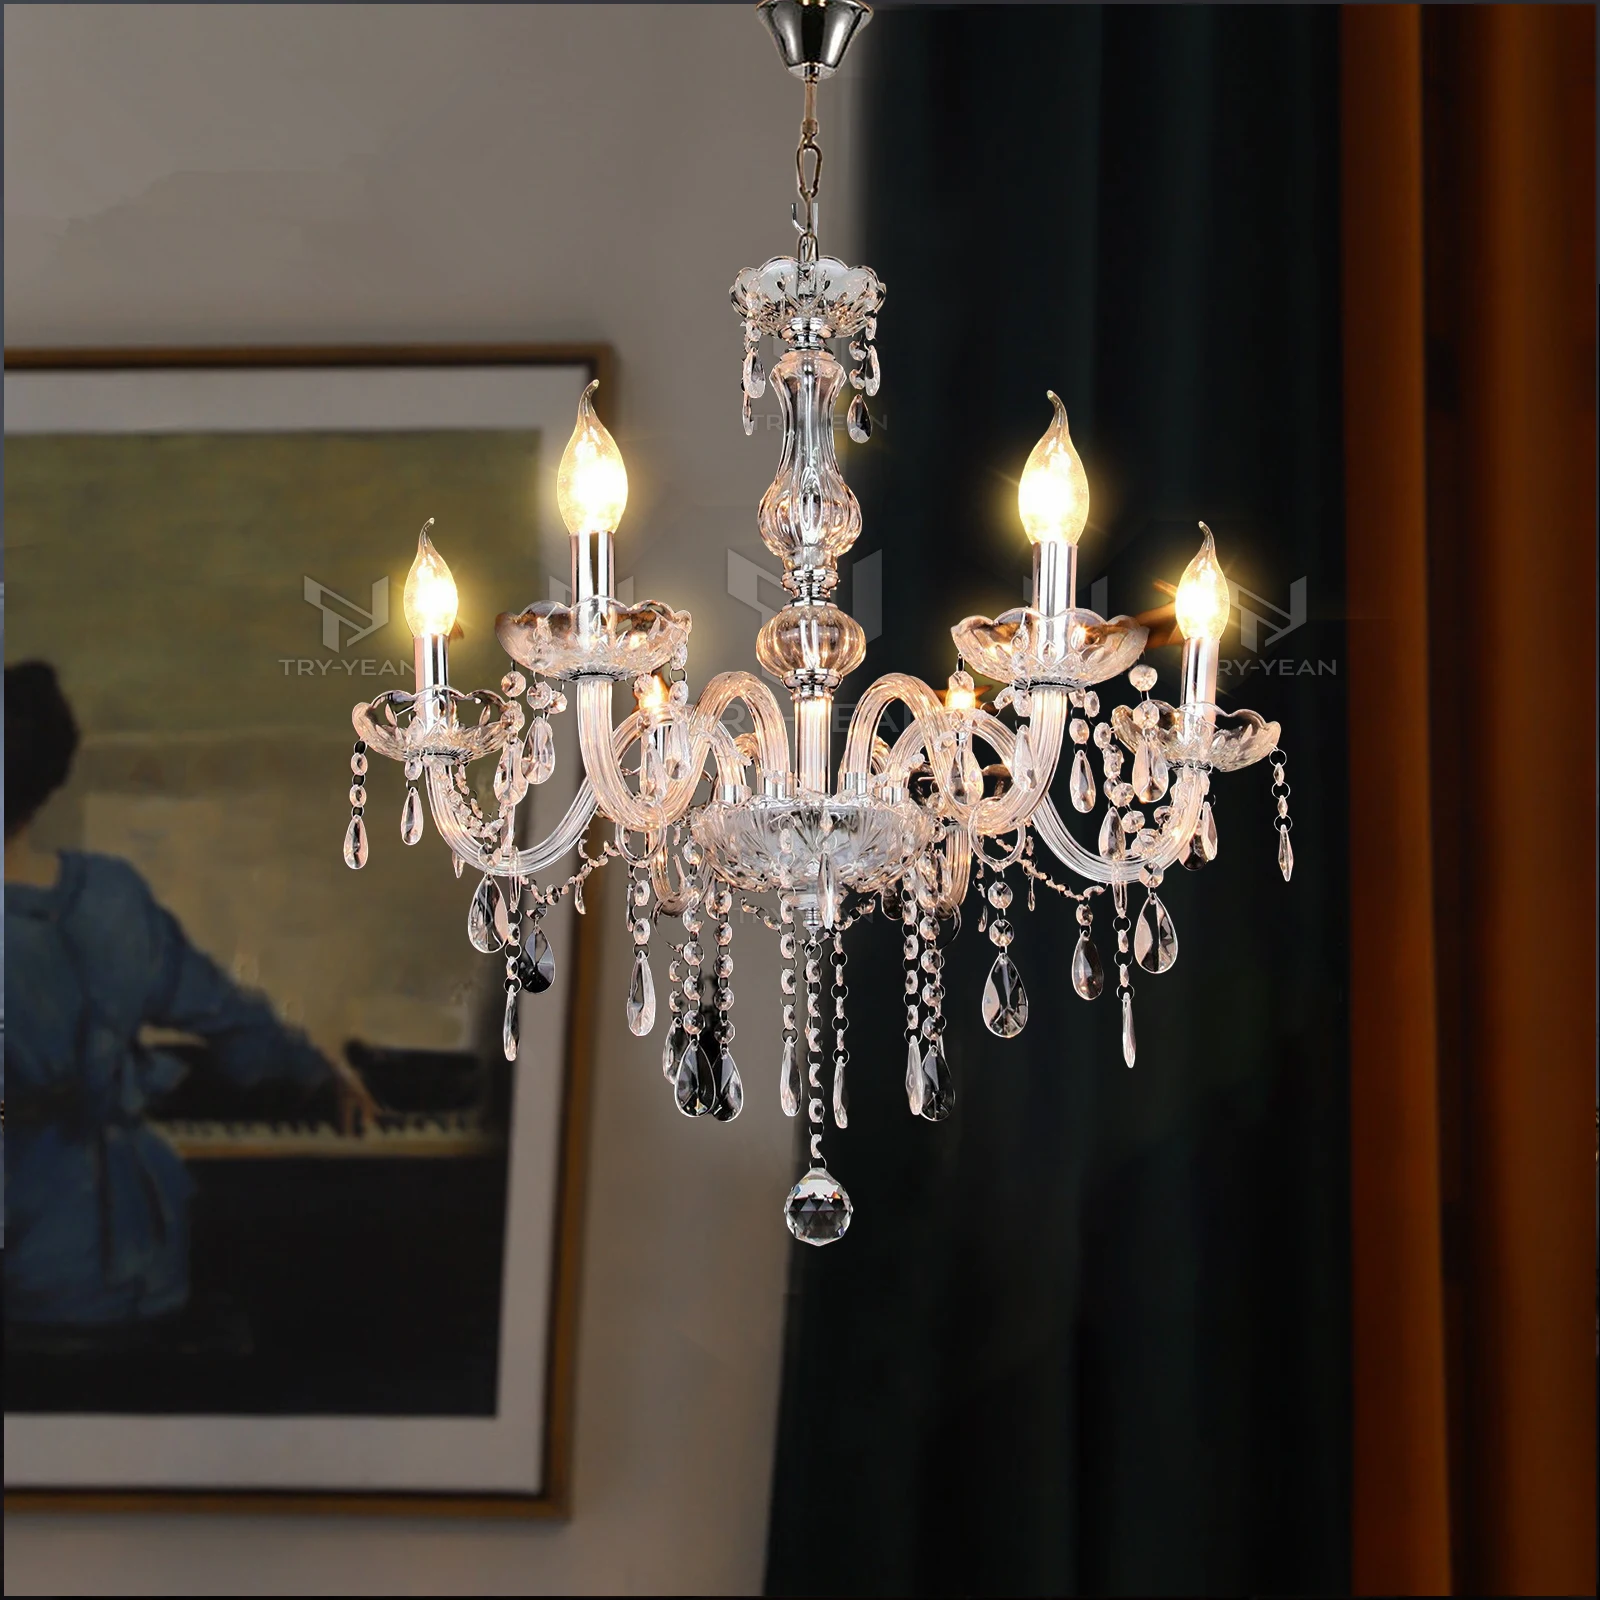 Nt cognac crystal glass 6 arms chandelier glass living room bedroom dining room hanging thumb200